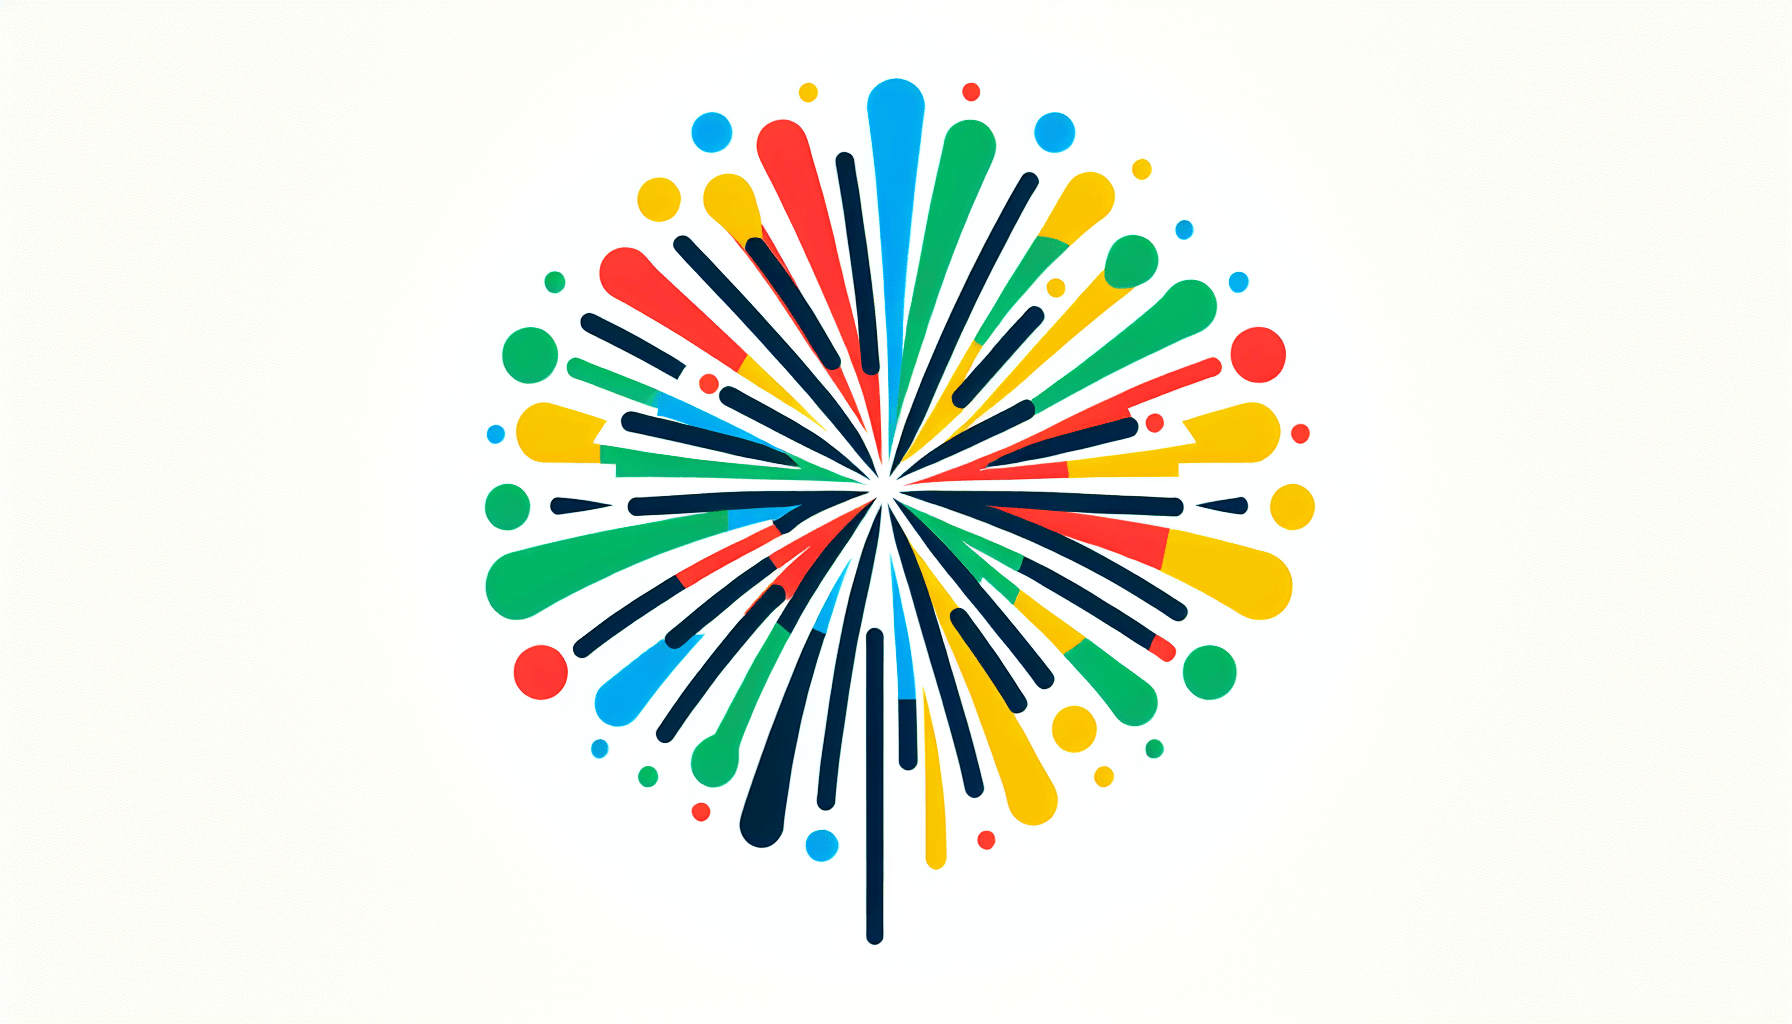 Firework in flat illustration style and white background, red #f47574, green #88c7a8, yellow #fcc44b, and blue #645bc8 colors.